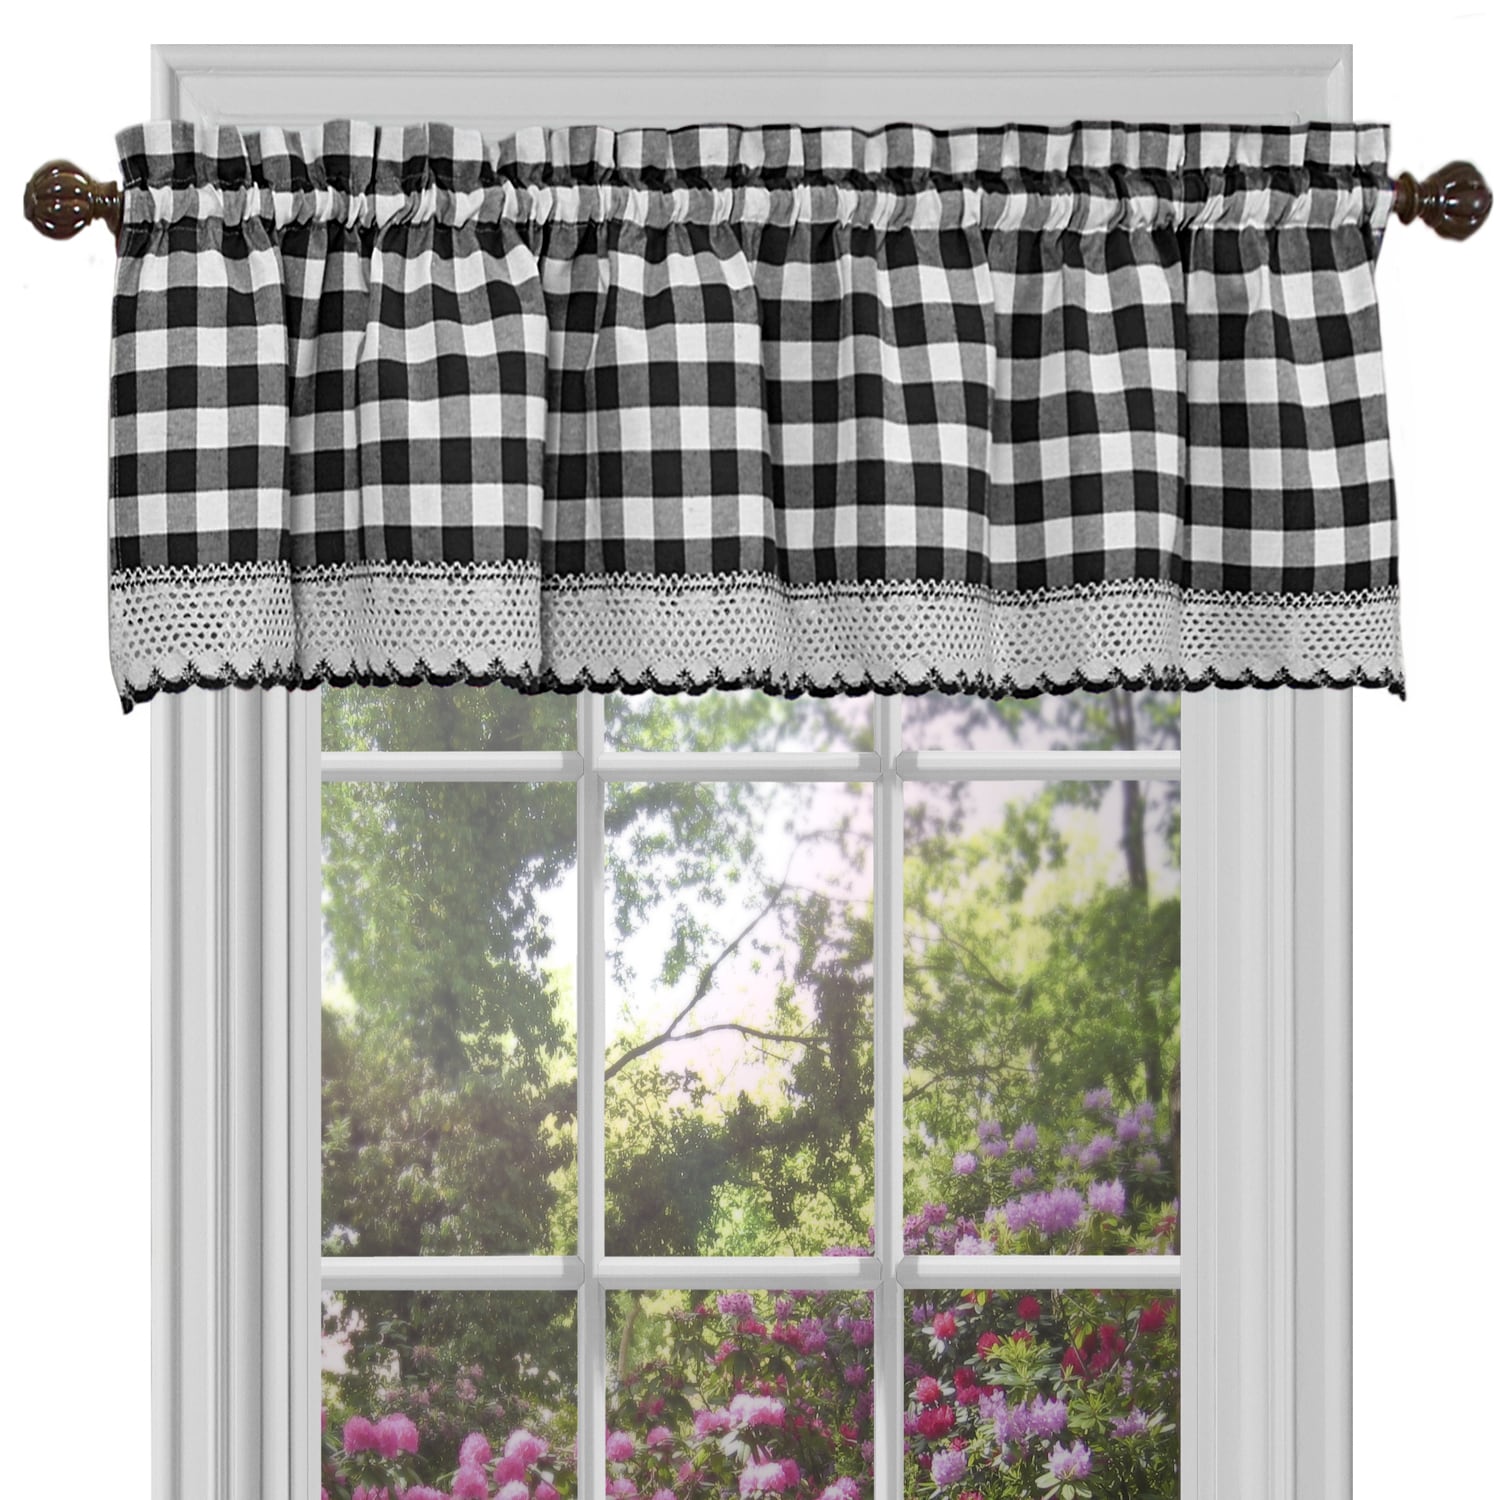 Buy Check Curtains Drapes Online At Overstock Our Best Window